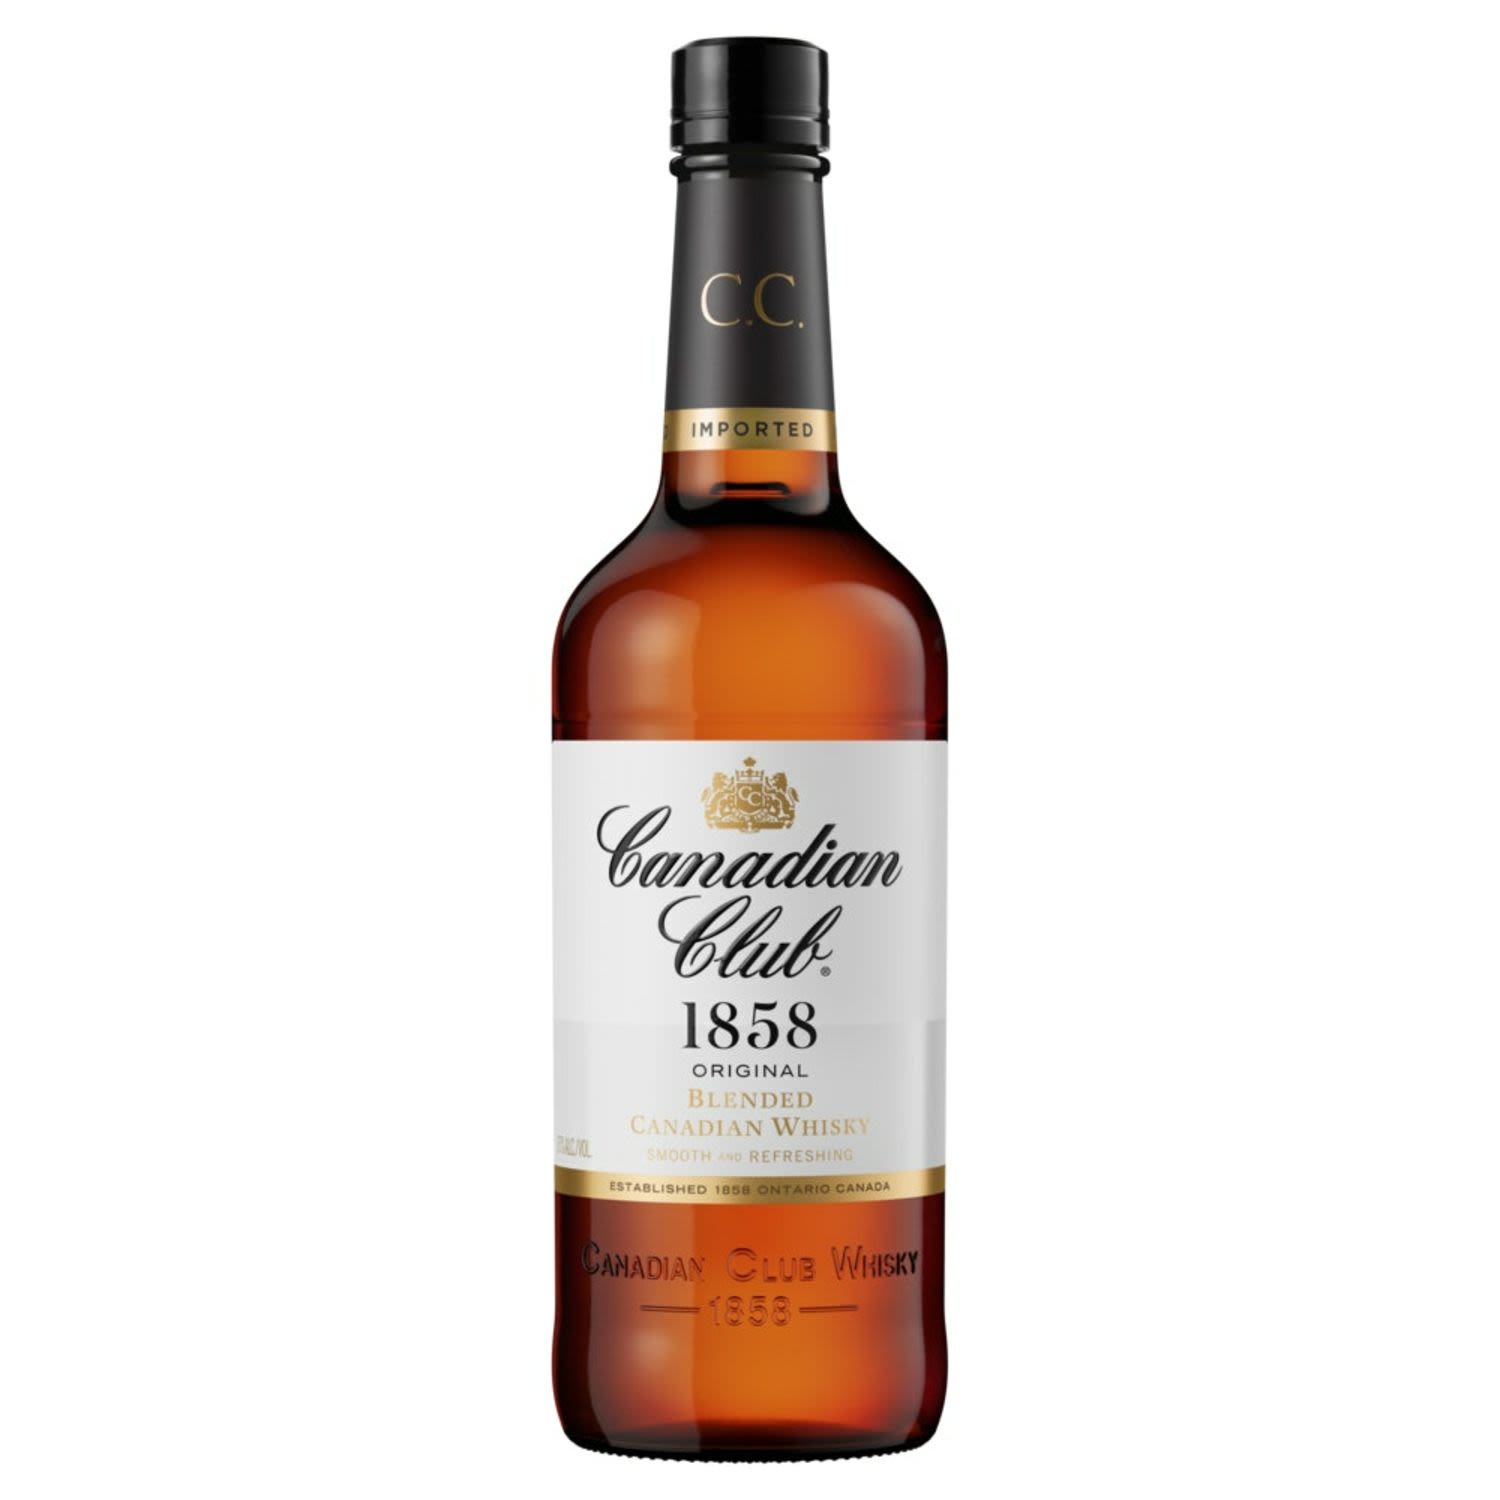 Canadian Club® Original 1858 whisky is pre-blended for a more refined taste profile and aged, longer than the three years required by law, in white-oak American bourbon barrels for a smooth, distinctive rich, oak flavour.<br /> <br />Alcohol Volume: 37.00%<br /><br />Pack Format: Bottle<br /><br />Standard Drinks: 20.5</br /><br />Pack Type: Bottle<br /><br />Country of Origin: Canada<br />